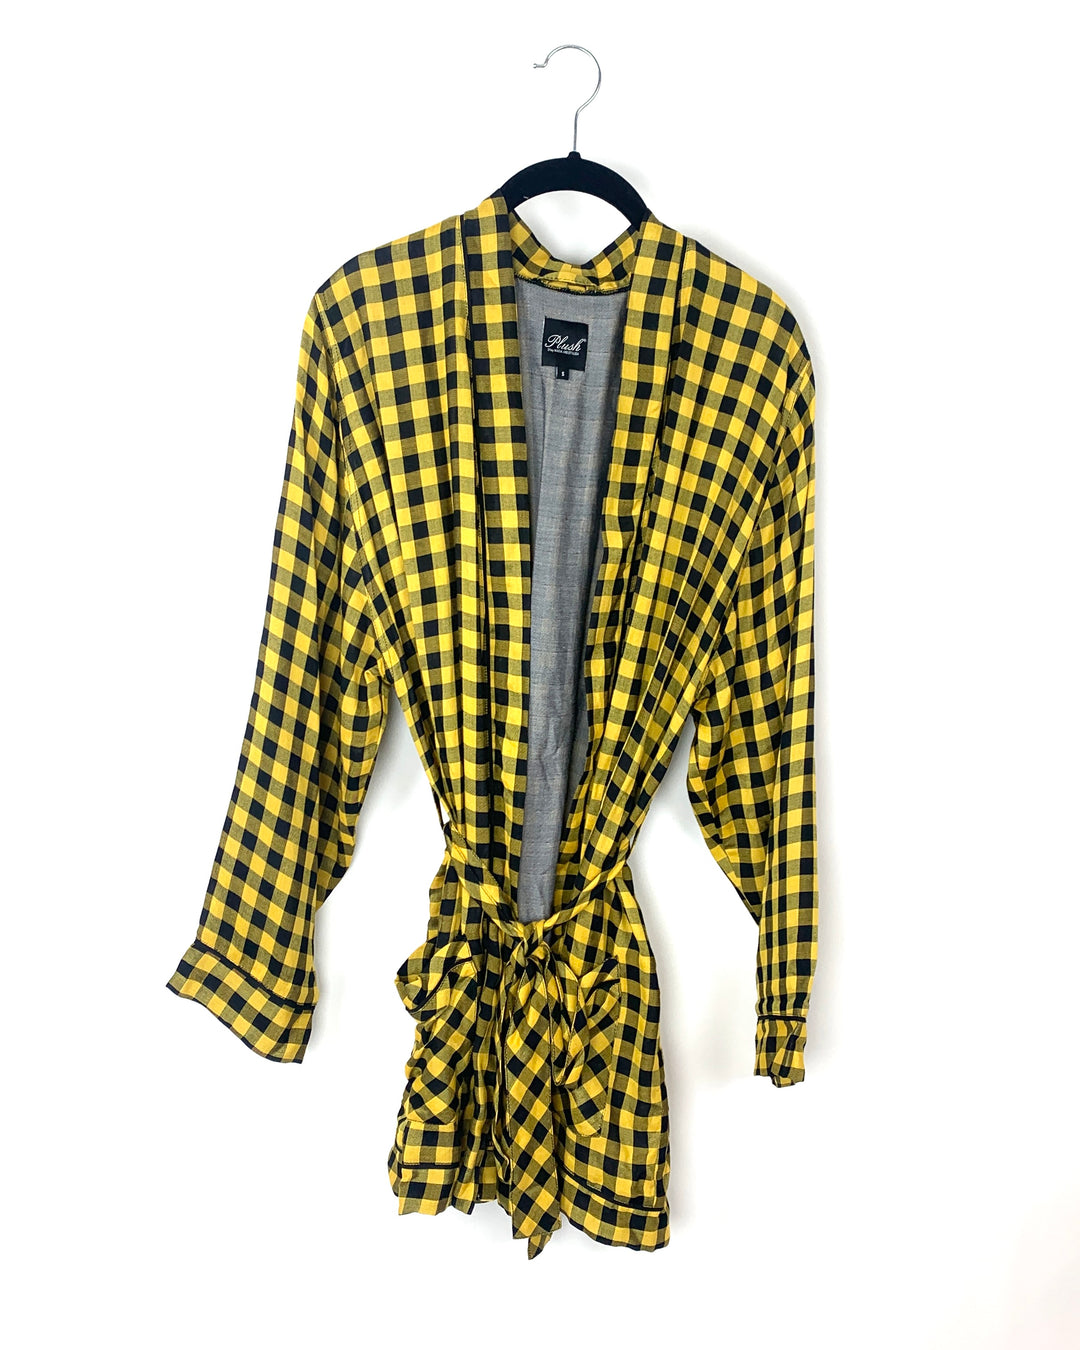 Yellow and Black Checkered Robe - Size Small